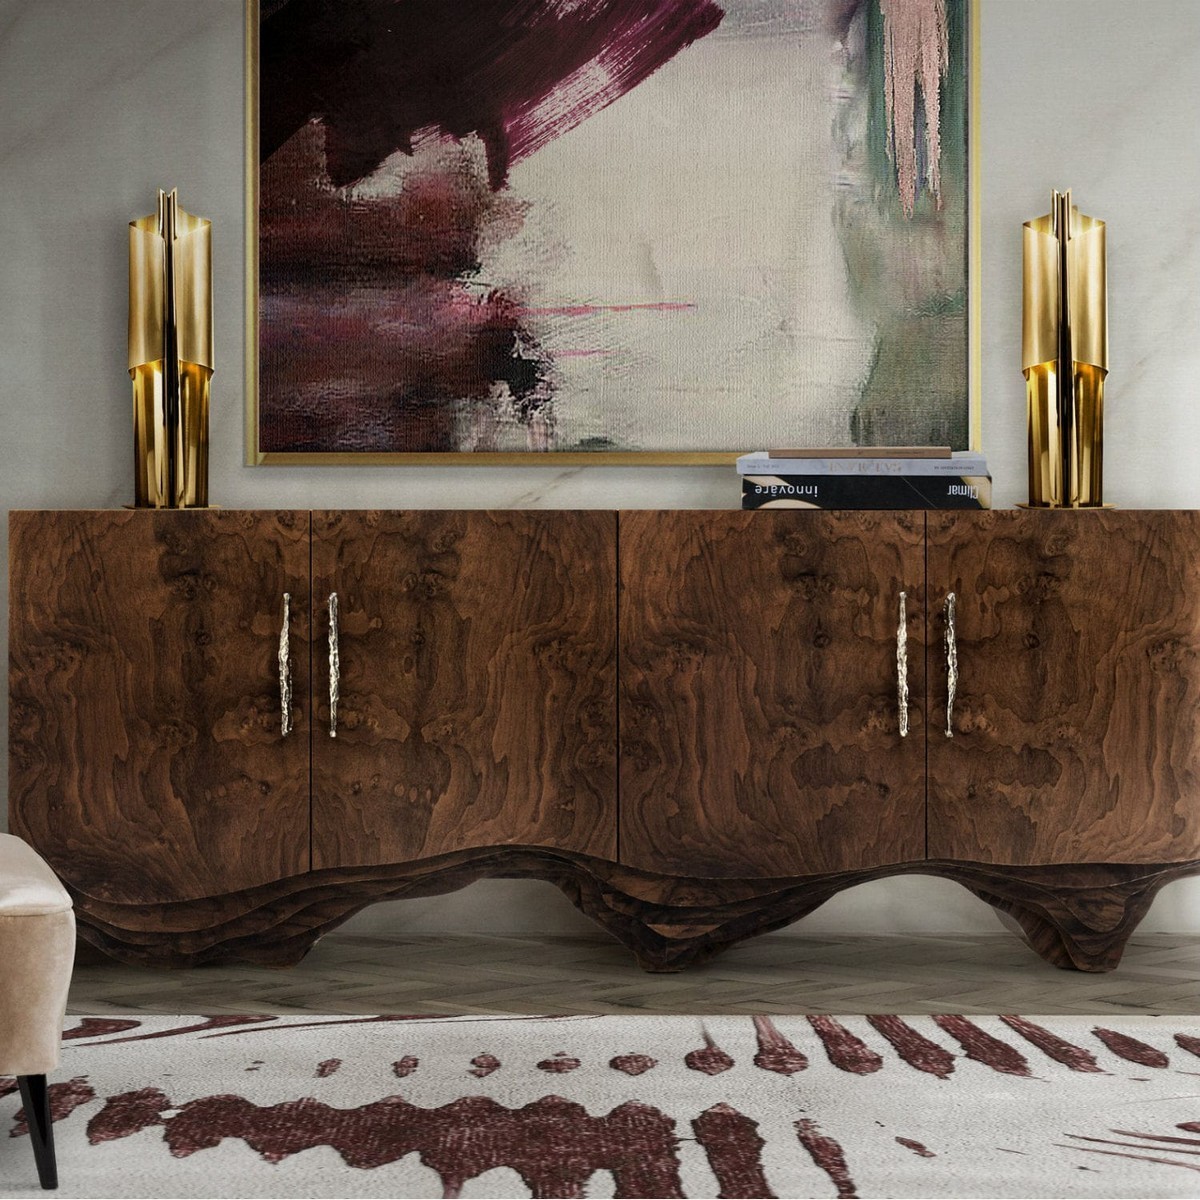 Trendy Sideboards For 2019 (Part II)